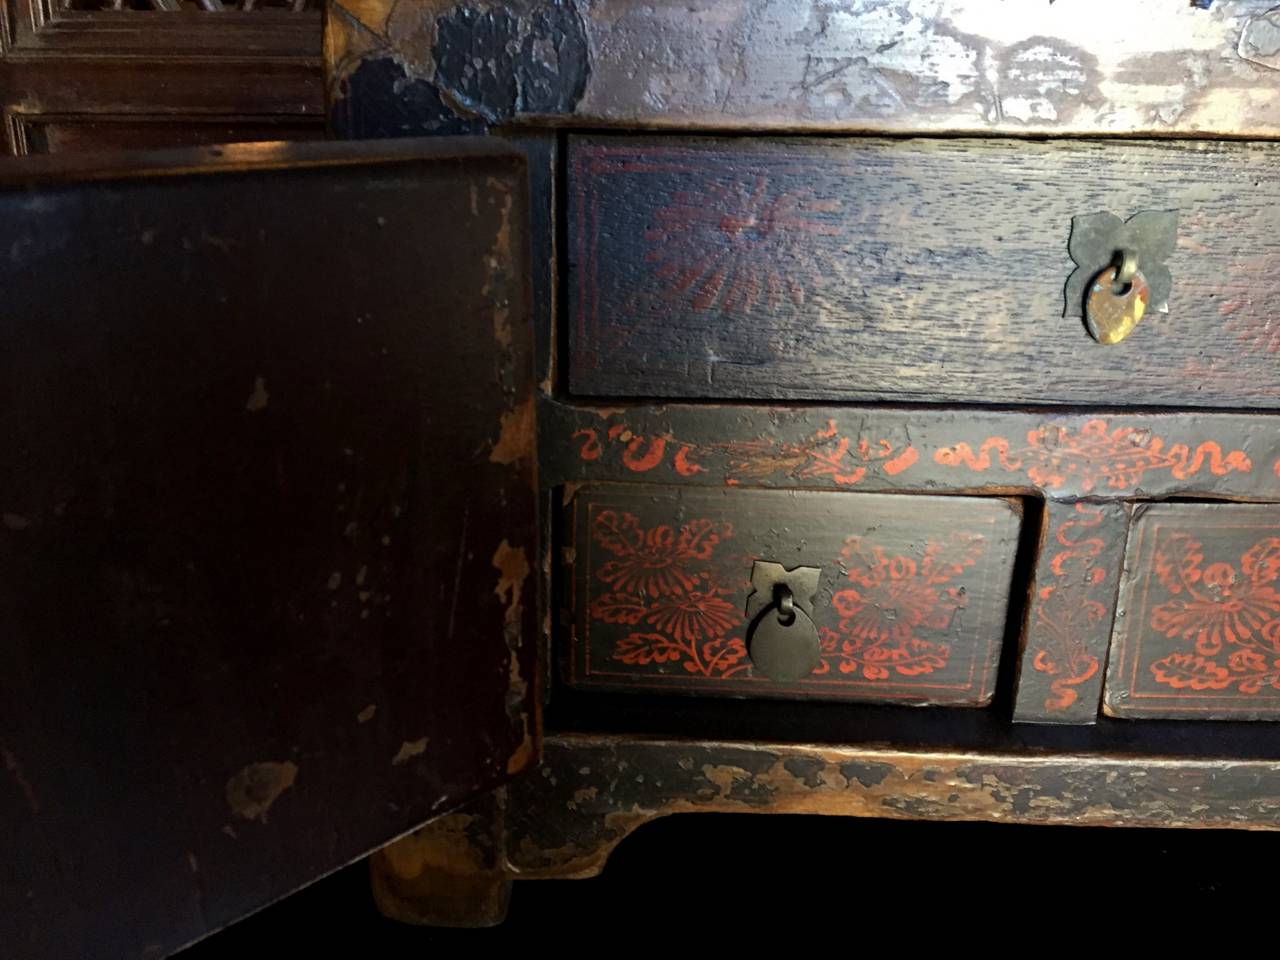 This very old chest or box has completely original painted and lacquered finish. The lacquers are multiple layered, which indicates the extensive work that was involved in its application. The doors feature a pair of vases which are symbols of peace